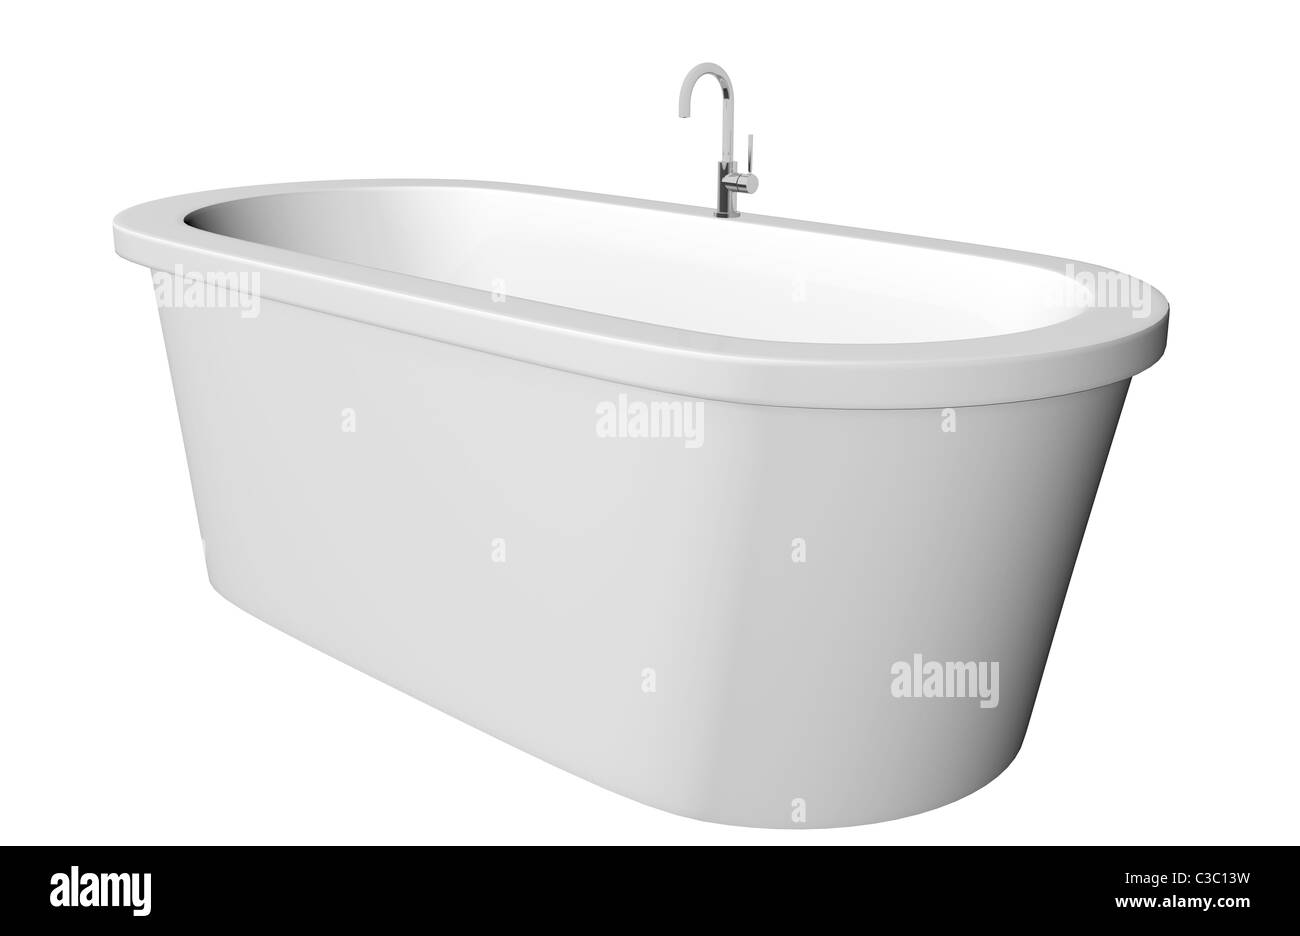 White and deep modern white bathtub with stainless steel fixtures, isolated against a white background Stock Photo